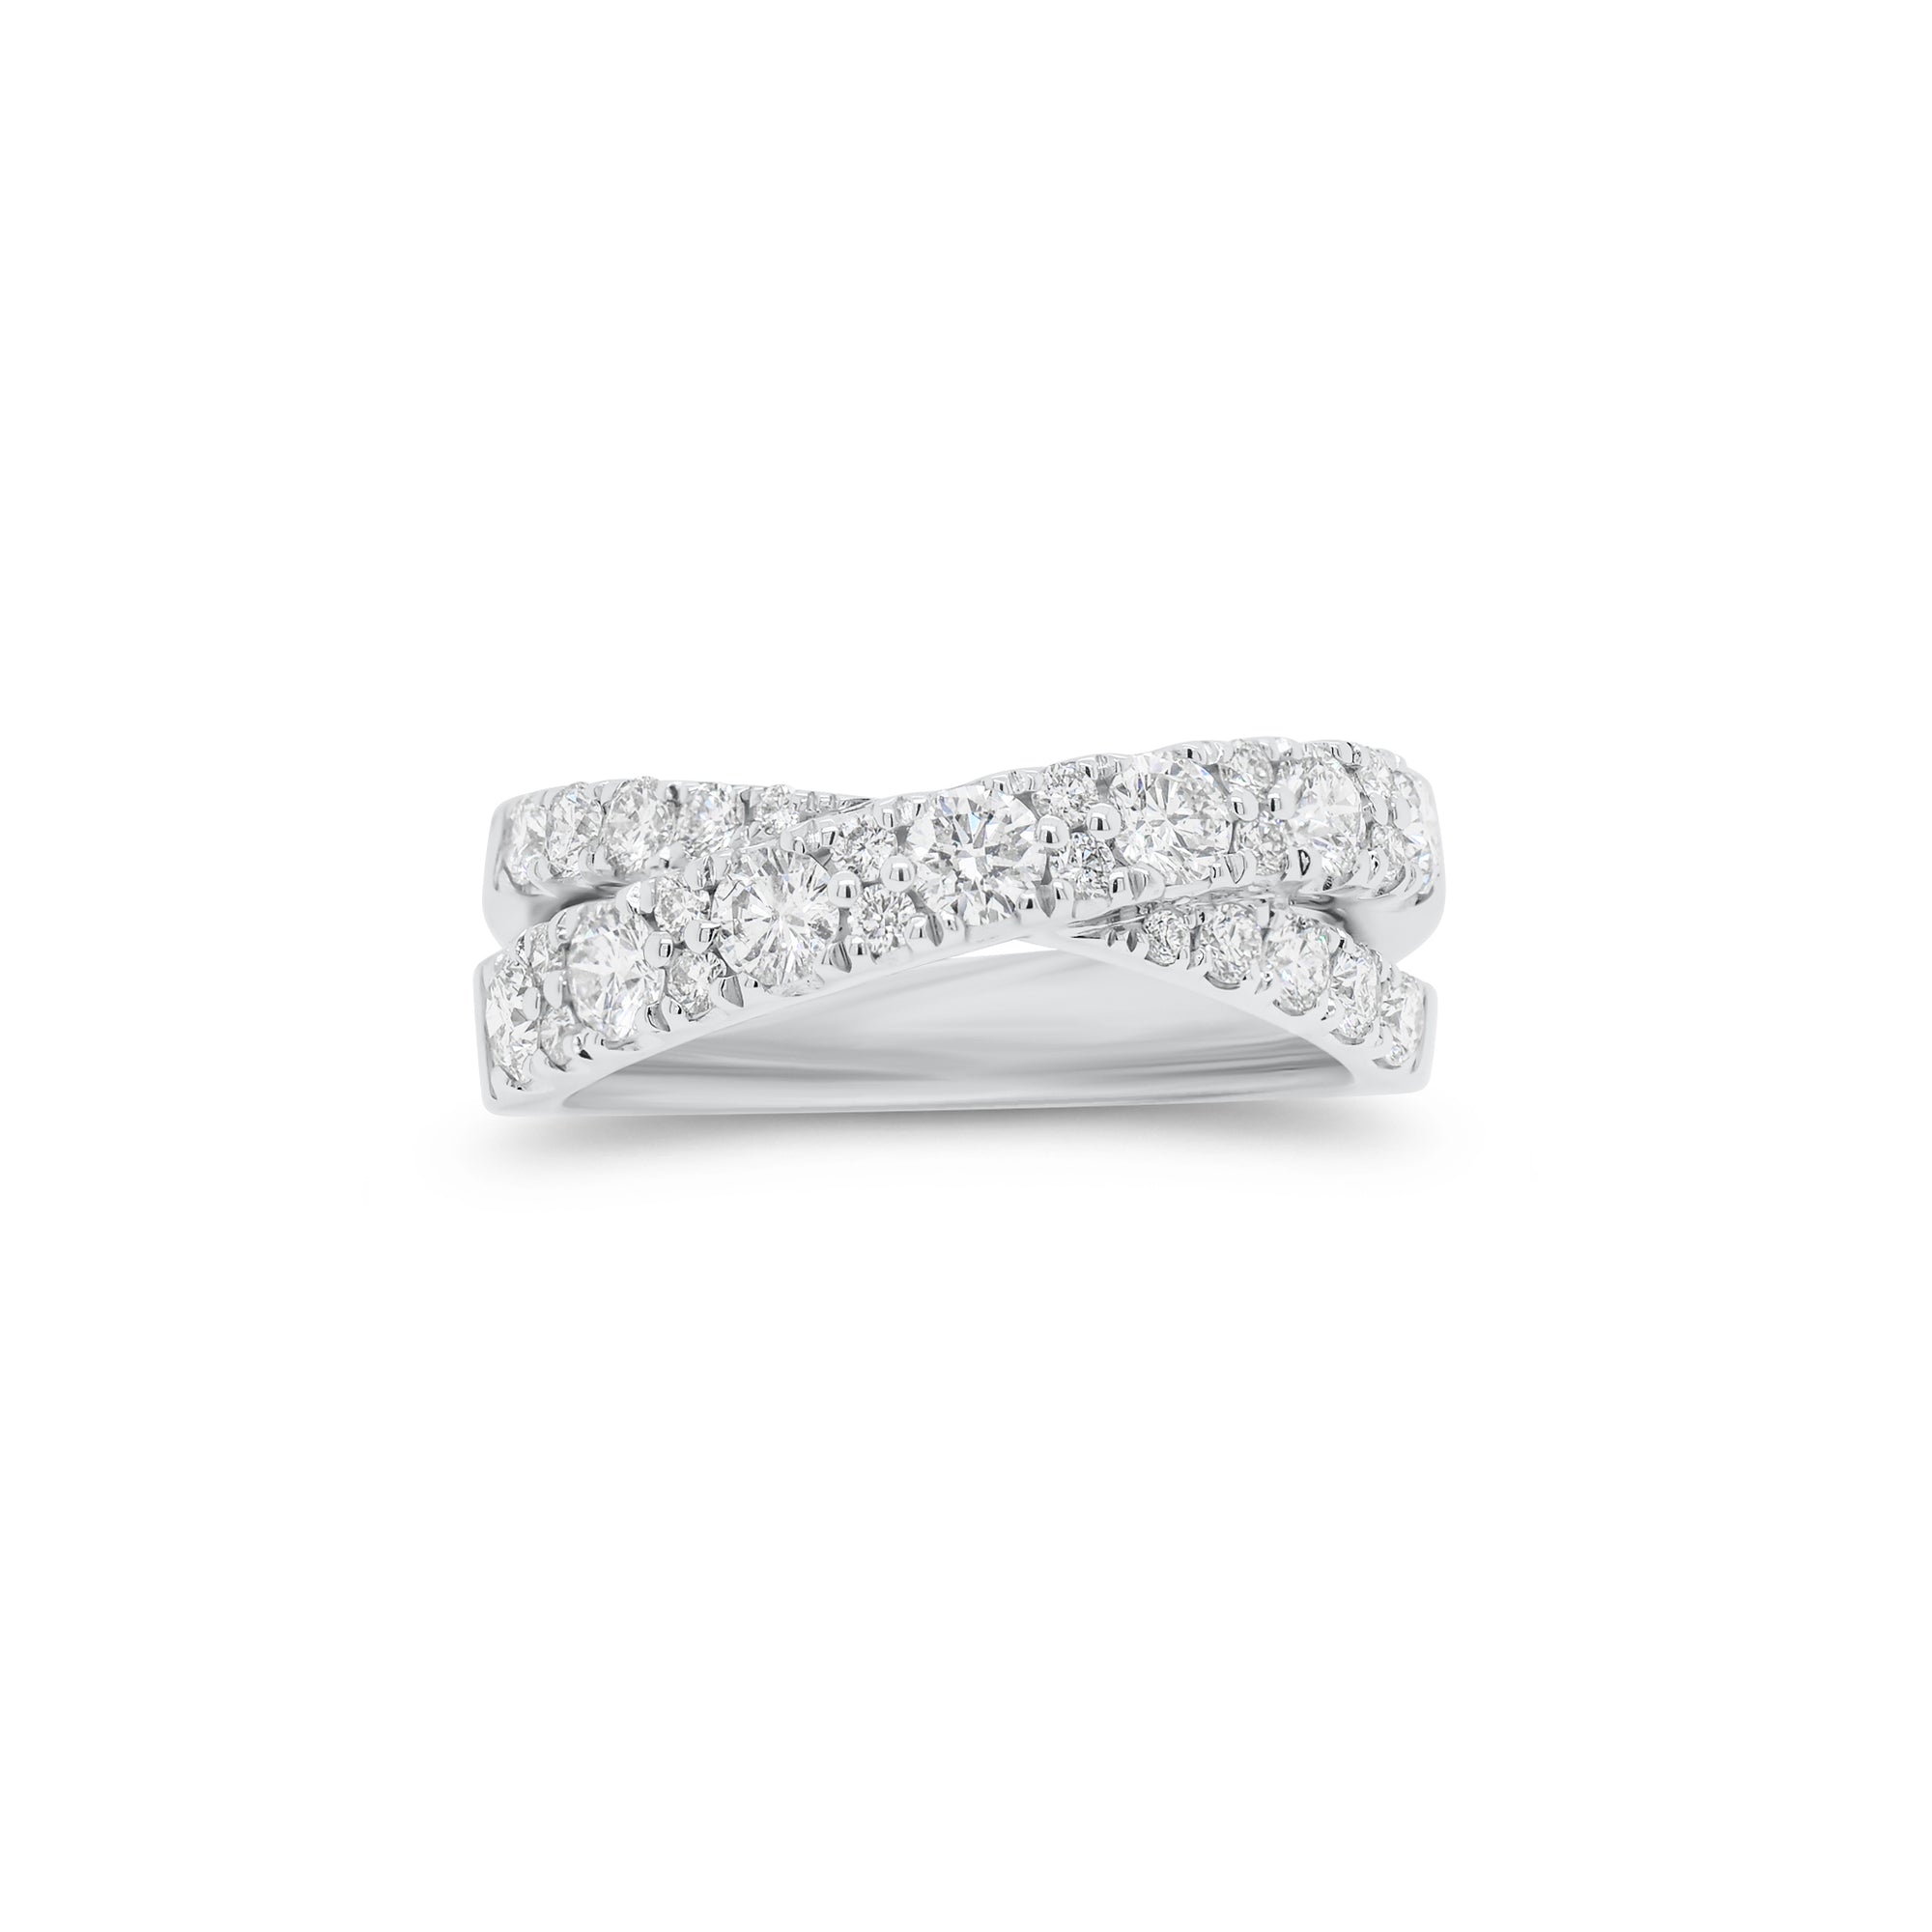 Diamond simple crossover ring - 18K gold weighing 5.98 grams  - 29 round diamonds weighing 1.06 carats